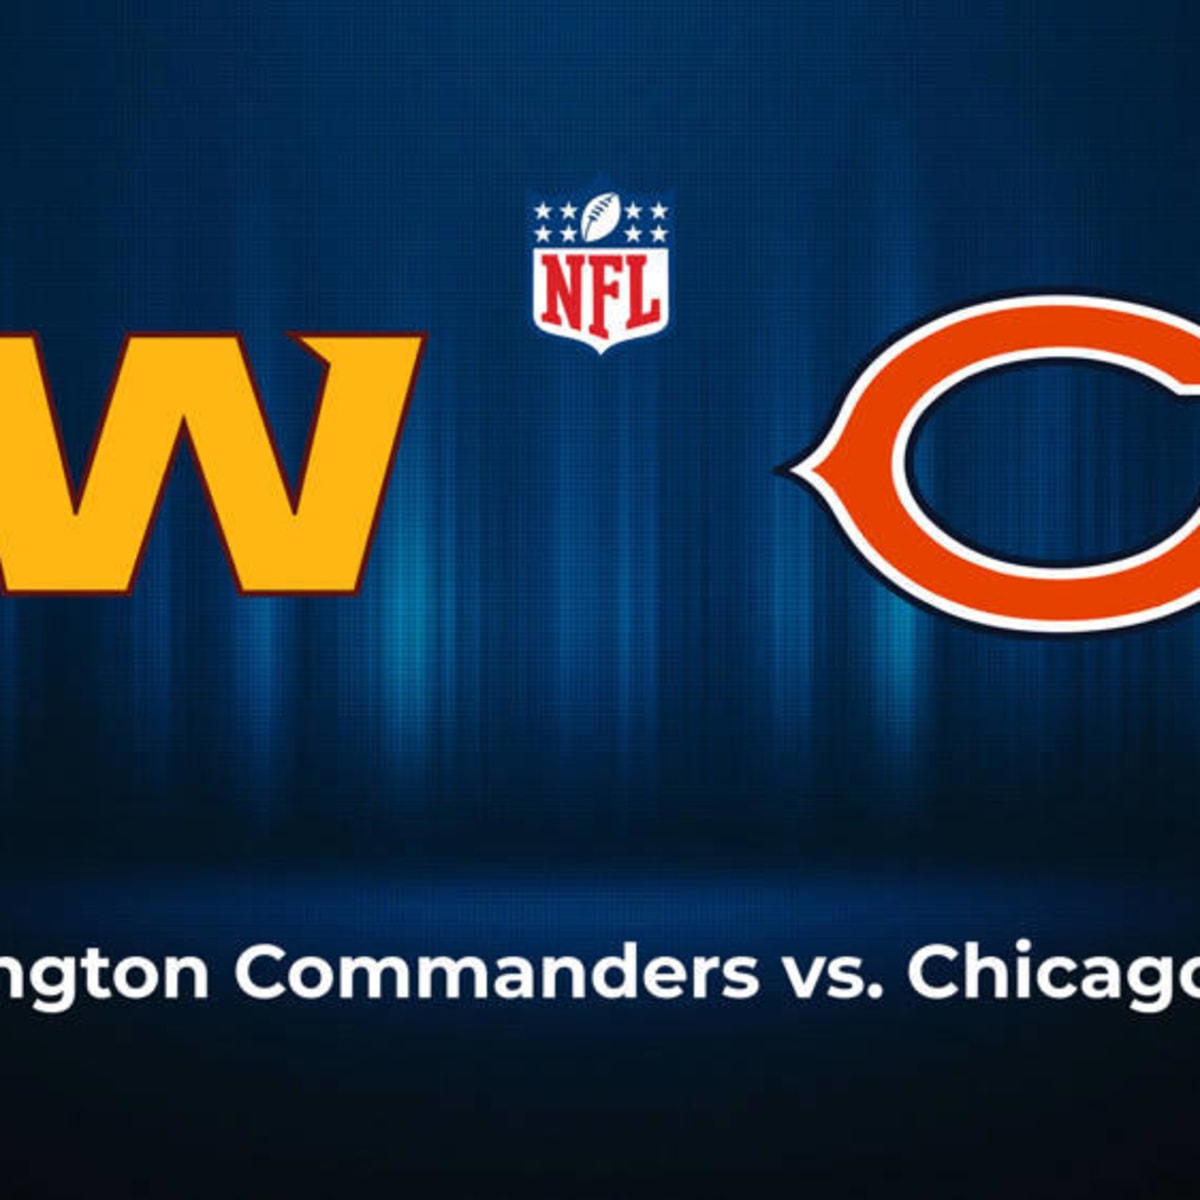 Chicago Bears vs. Washington Redskins: How to watch, game time